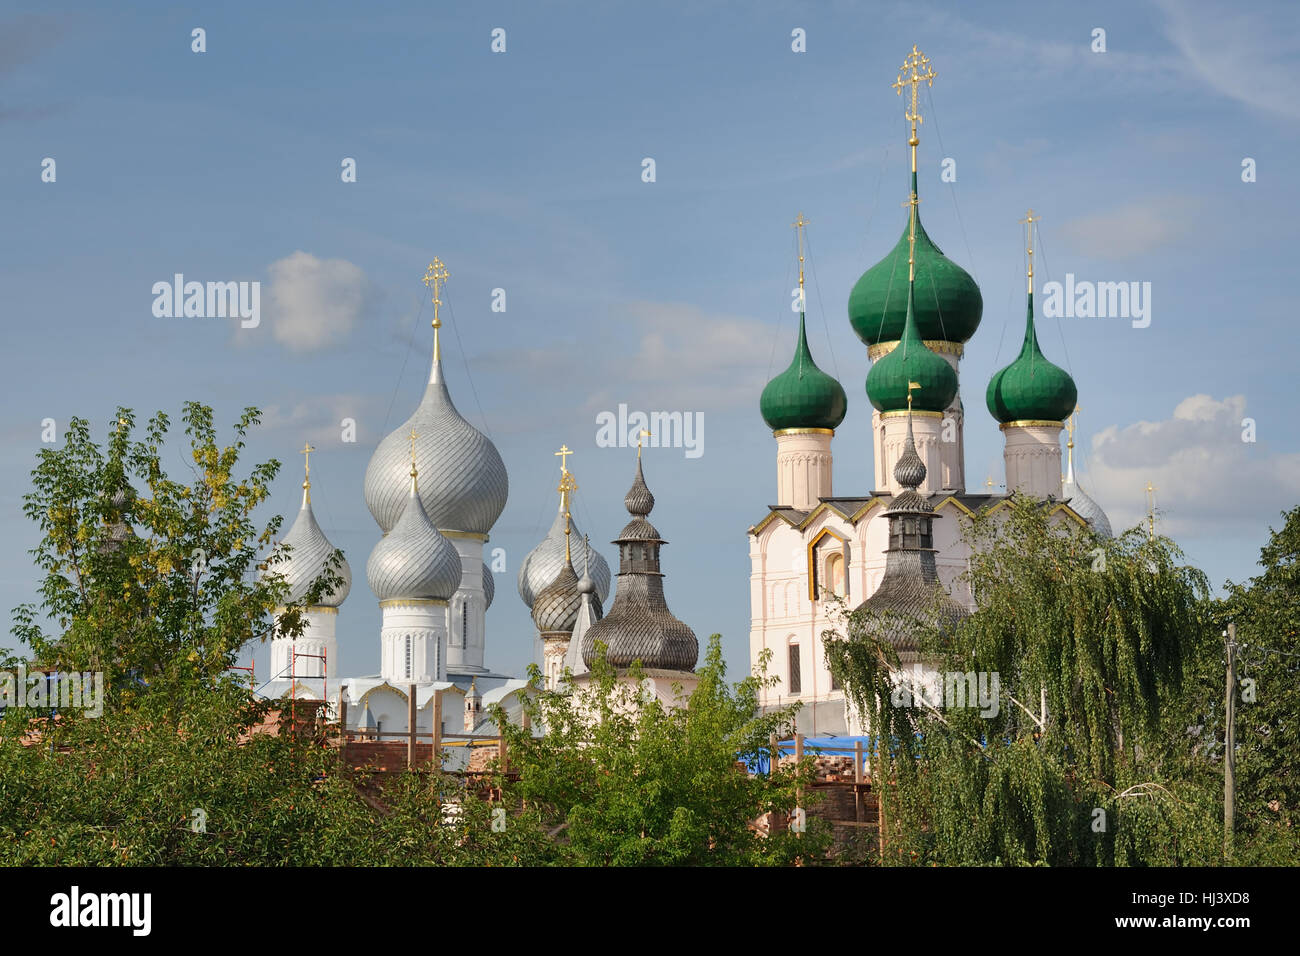 Onion Domes of Churches and Towers of Rostov Kremlin Framed by Trees. Stock Photo